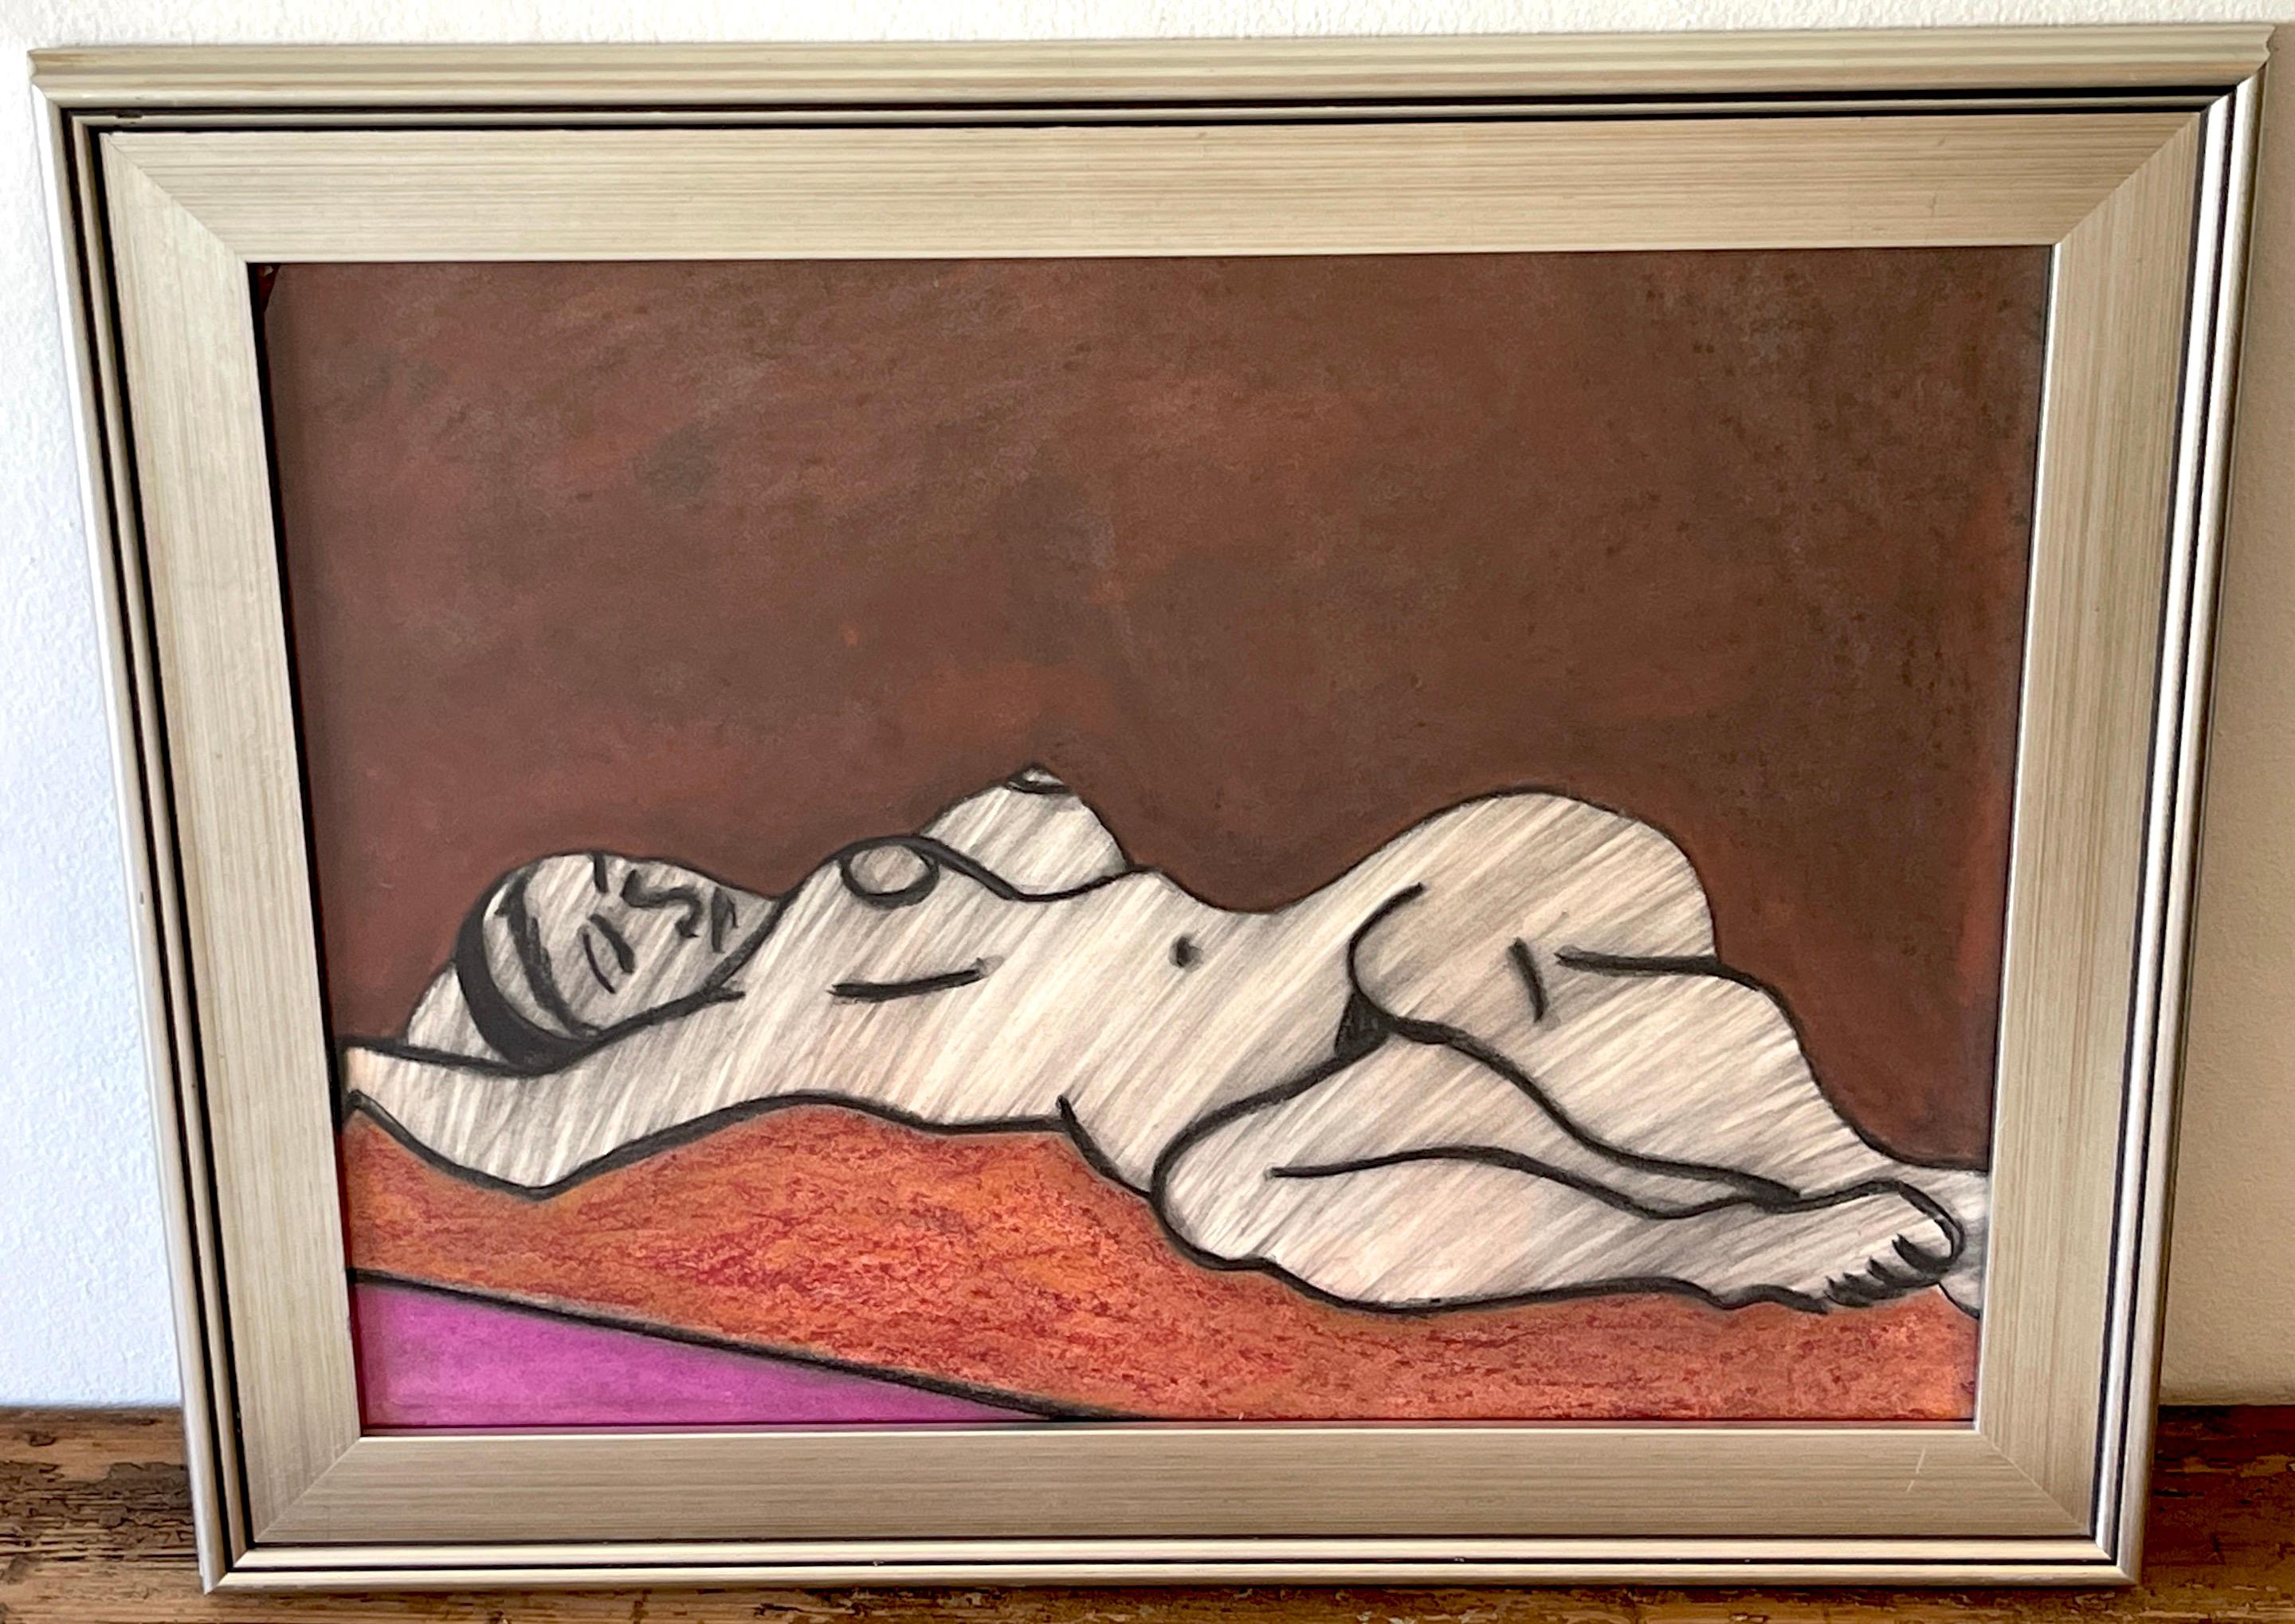 Crayon 'Odalisque' Oil/Mixed Media on Paper, 1960s by Douglas D. Peden  For Sale